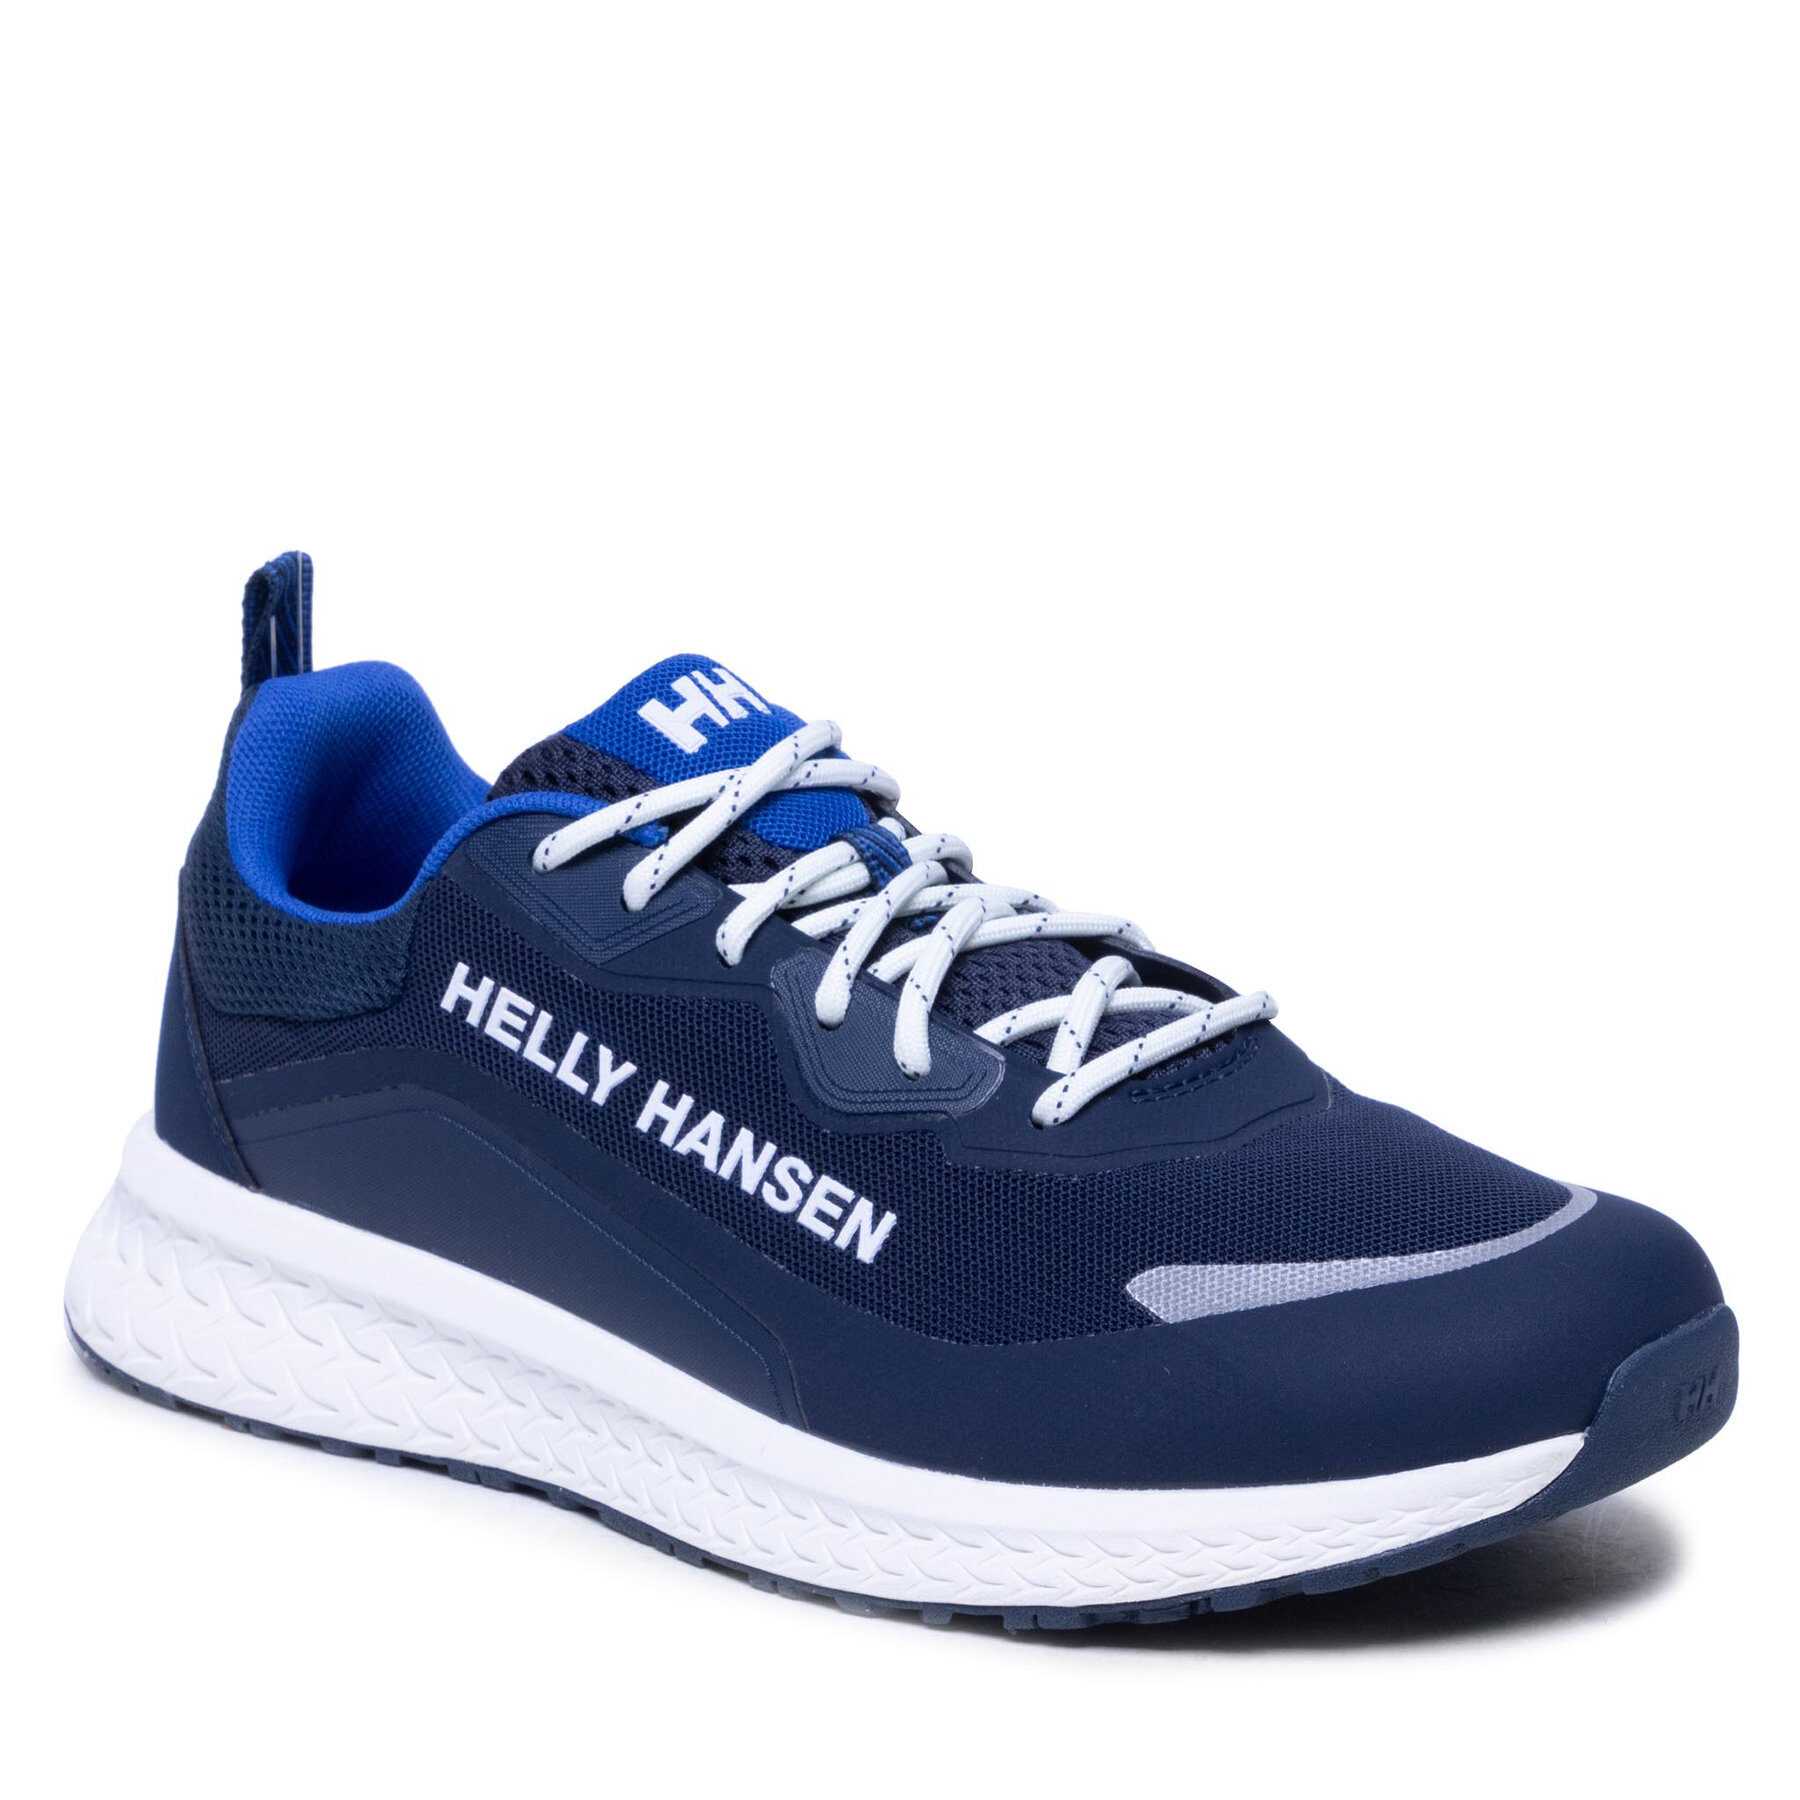 Sneakers Helly Hansen Eqa 11775_689 Evening Blue/White